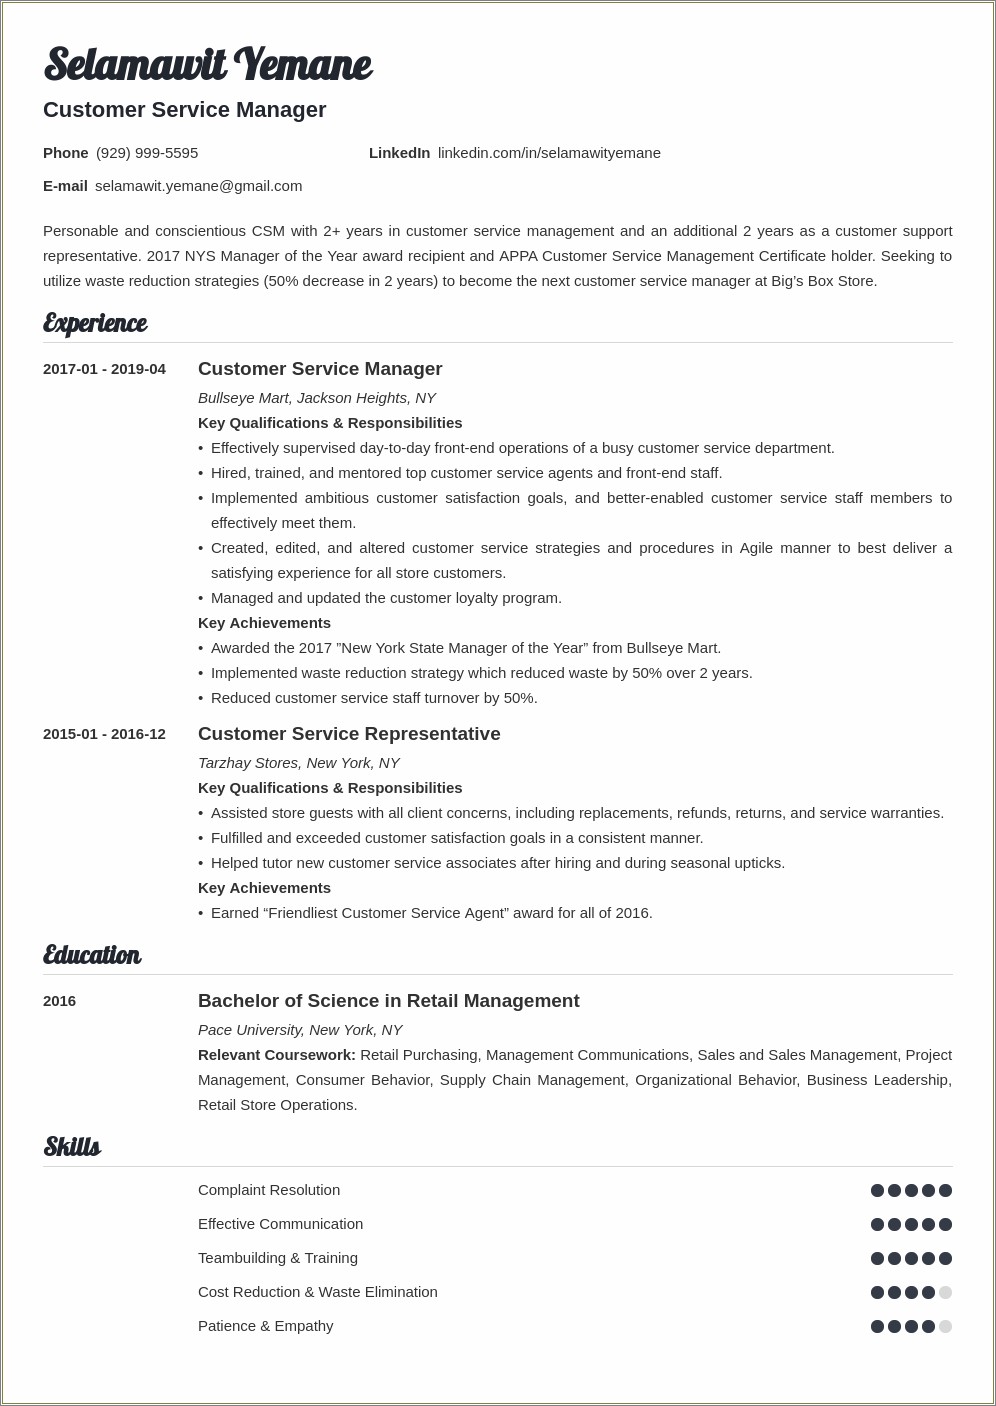 Resume Objective Statement Examples For Customer Service